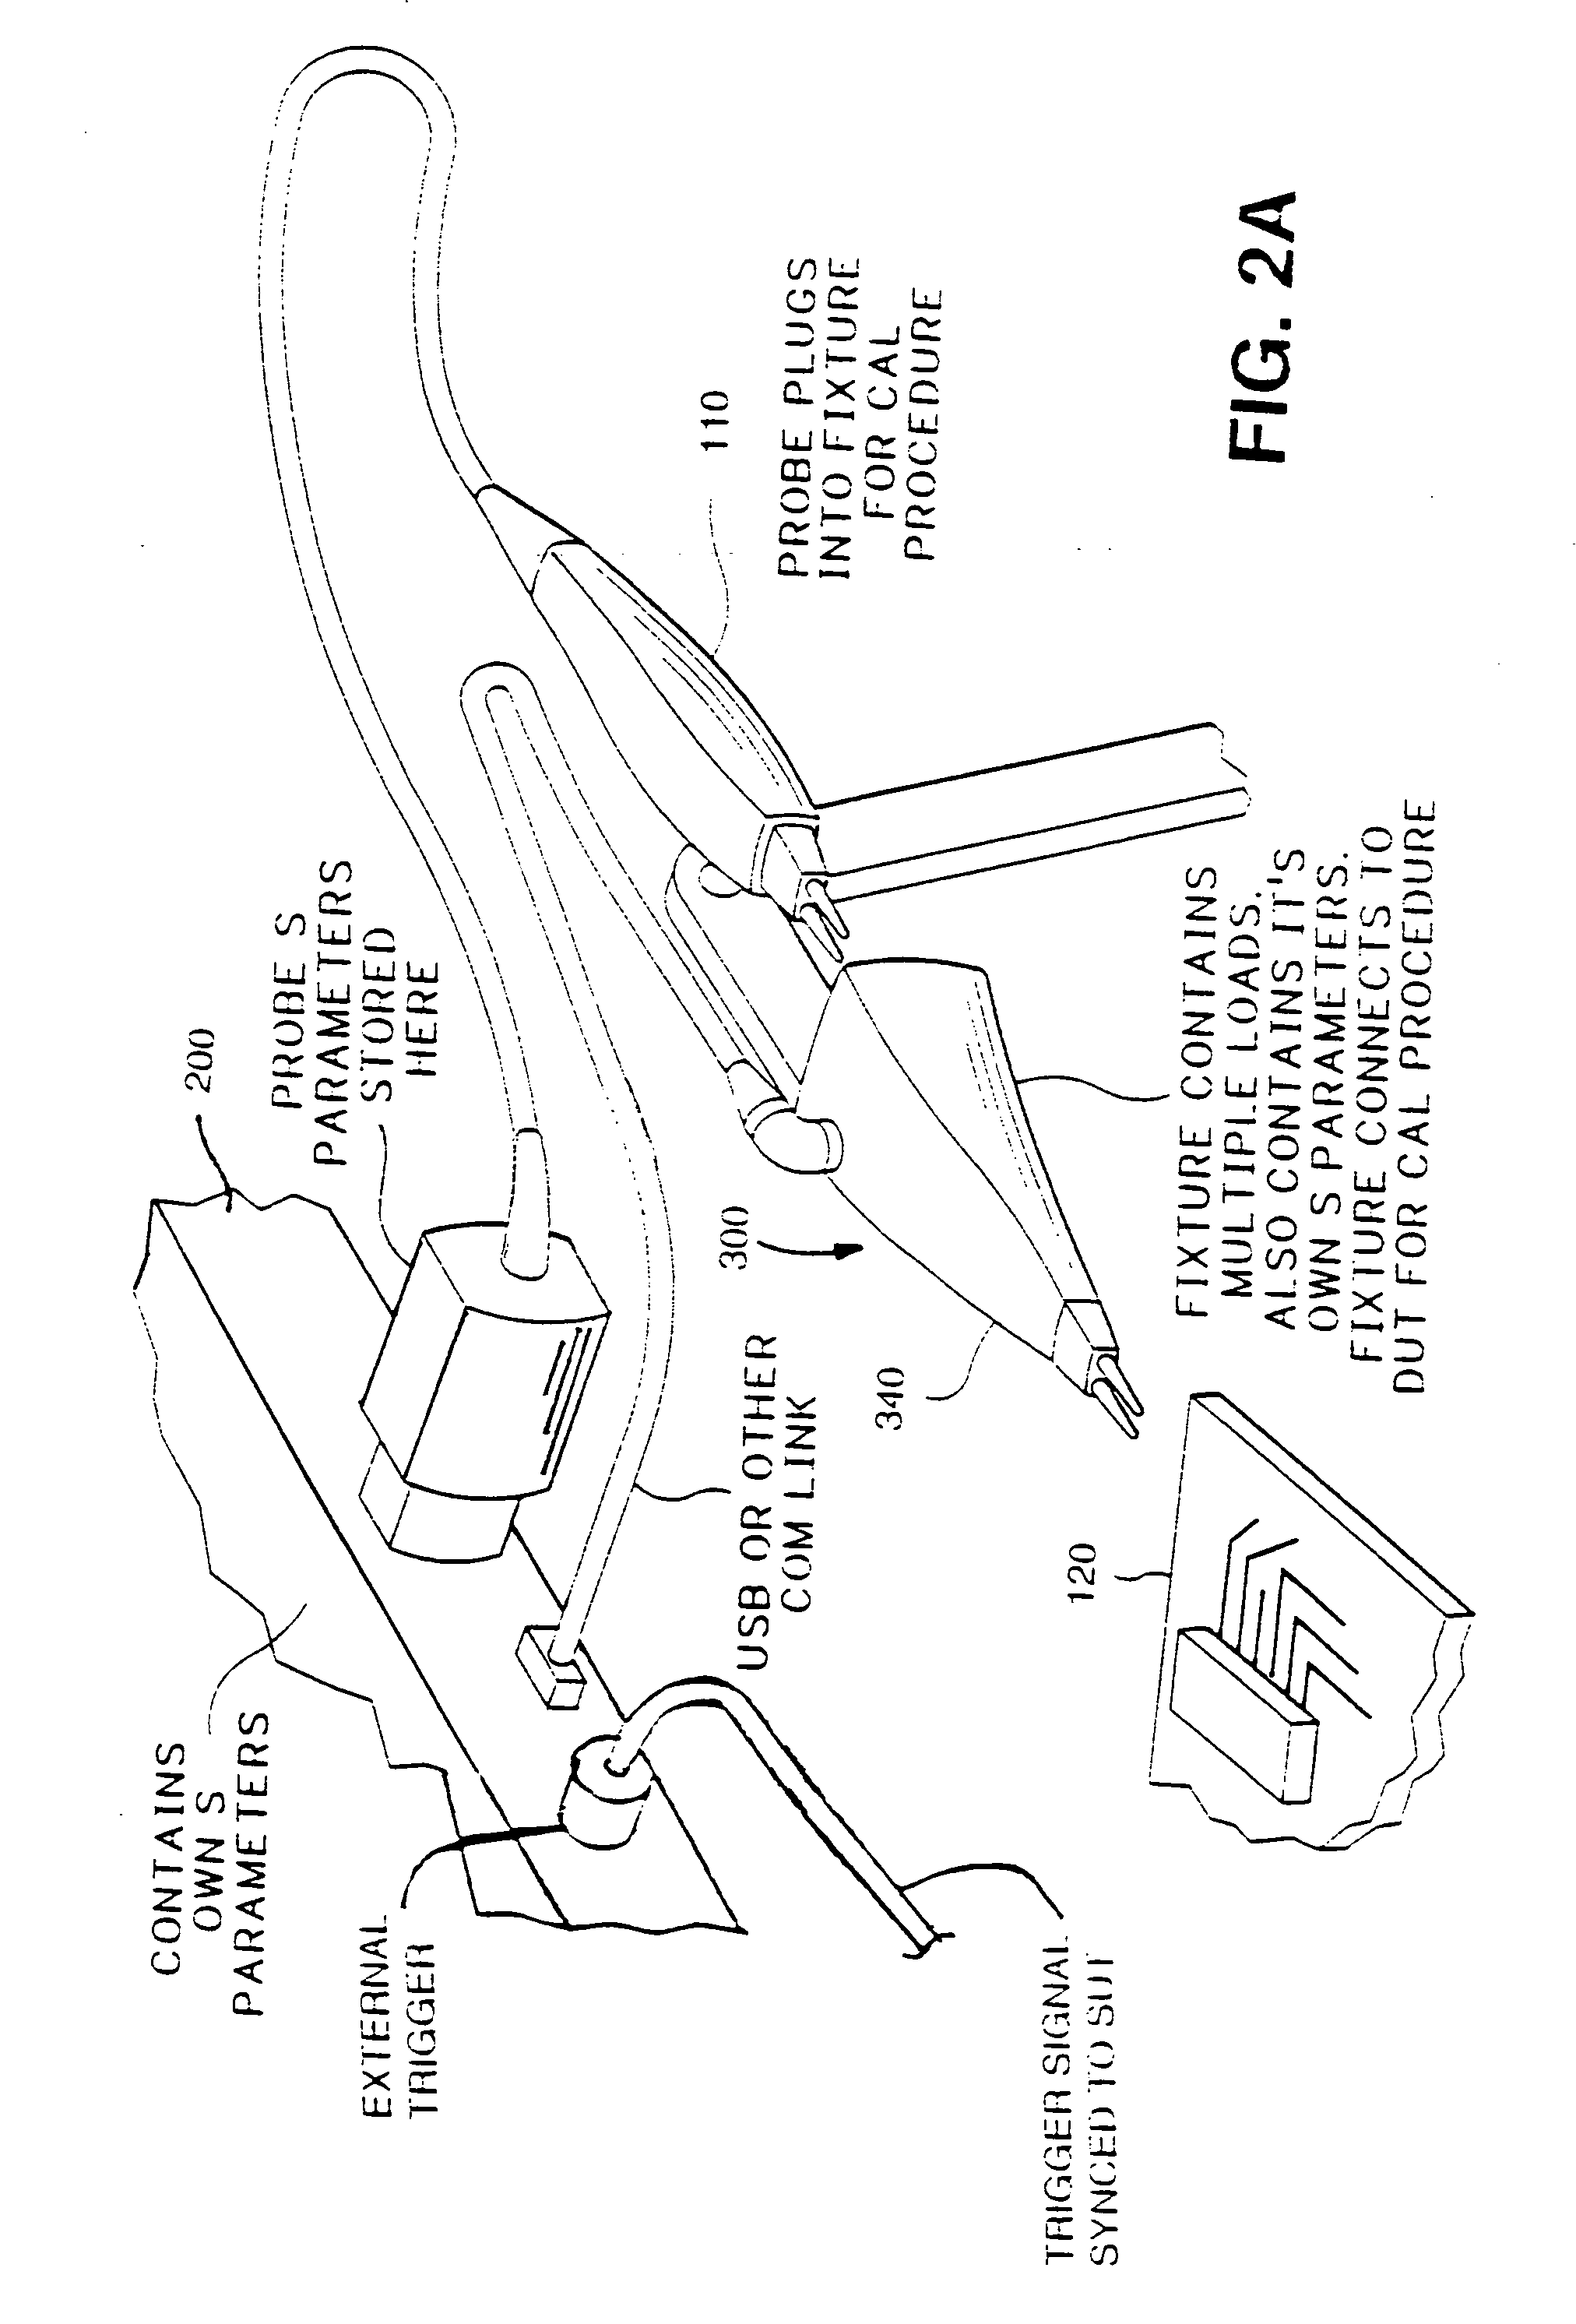 Signal analysis system and calibration method for measuring the impedance of a device under test